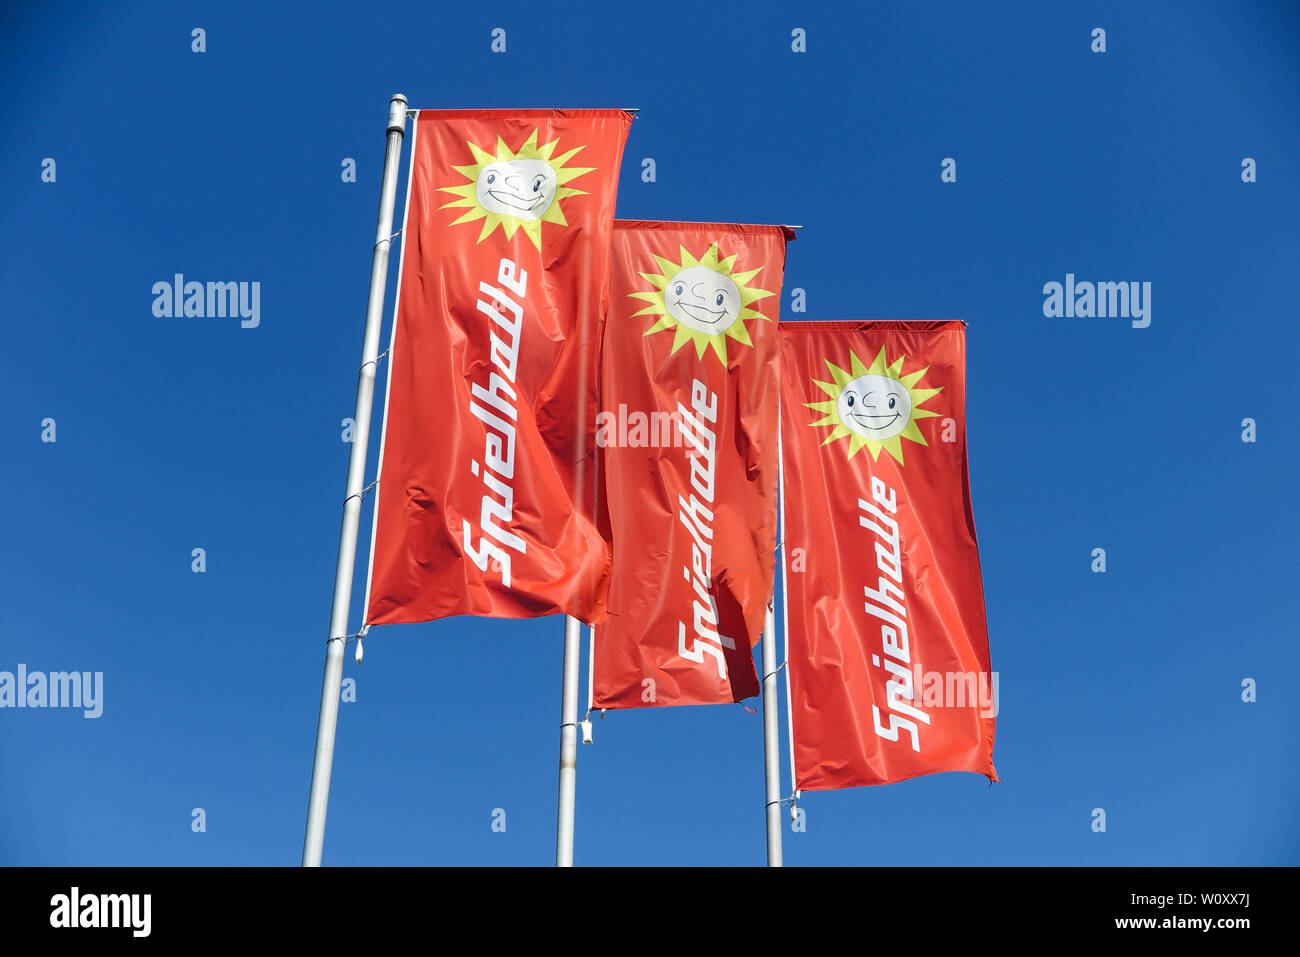 TOENISVORST, GERMANY - JUIN 28. 2019: Close up of red flags against blue sky with sun logo of Merkur Spielothek (german gambling hall chain) Stock Photo